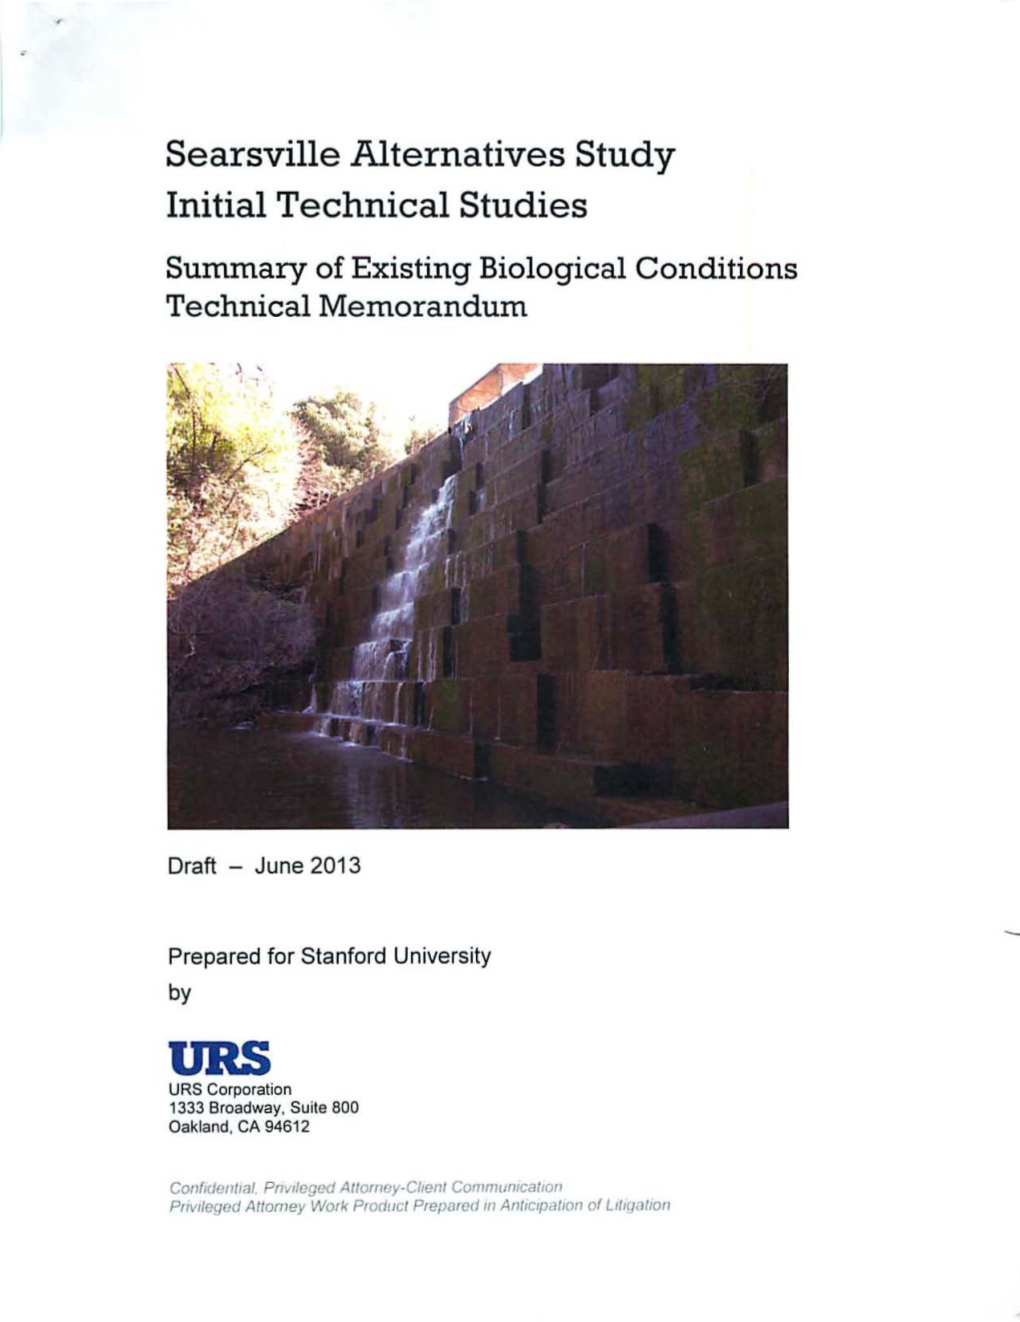 Searsville Alternatives Study Initial Technical Studies Summary of Existing Biological Conditions Technical Memorandum